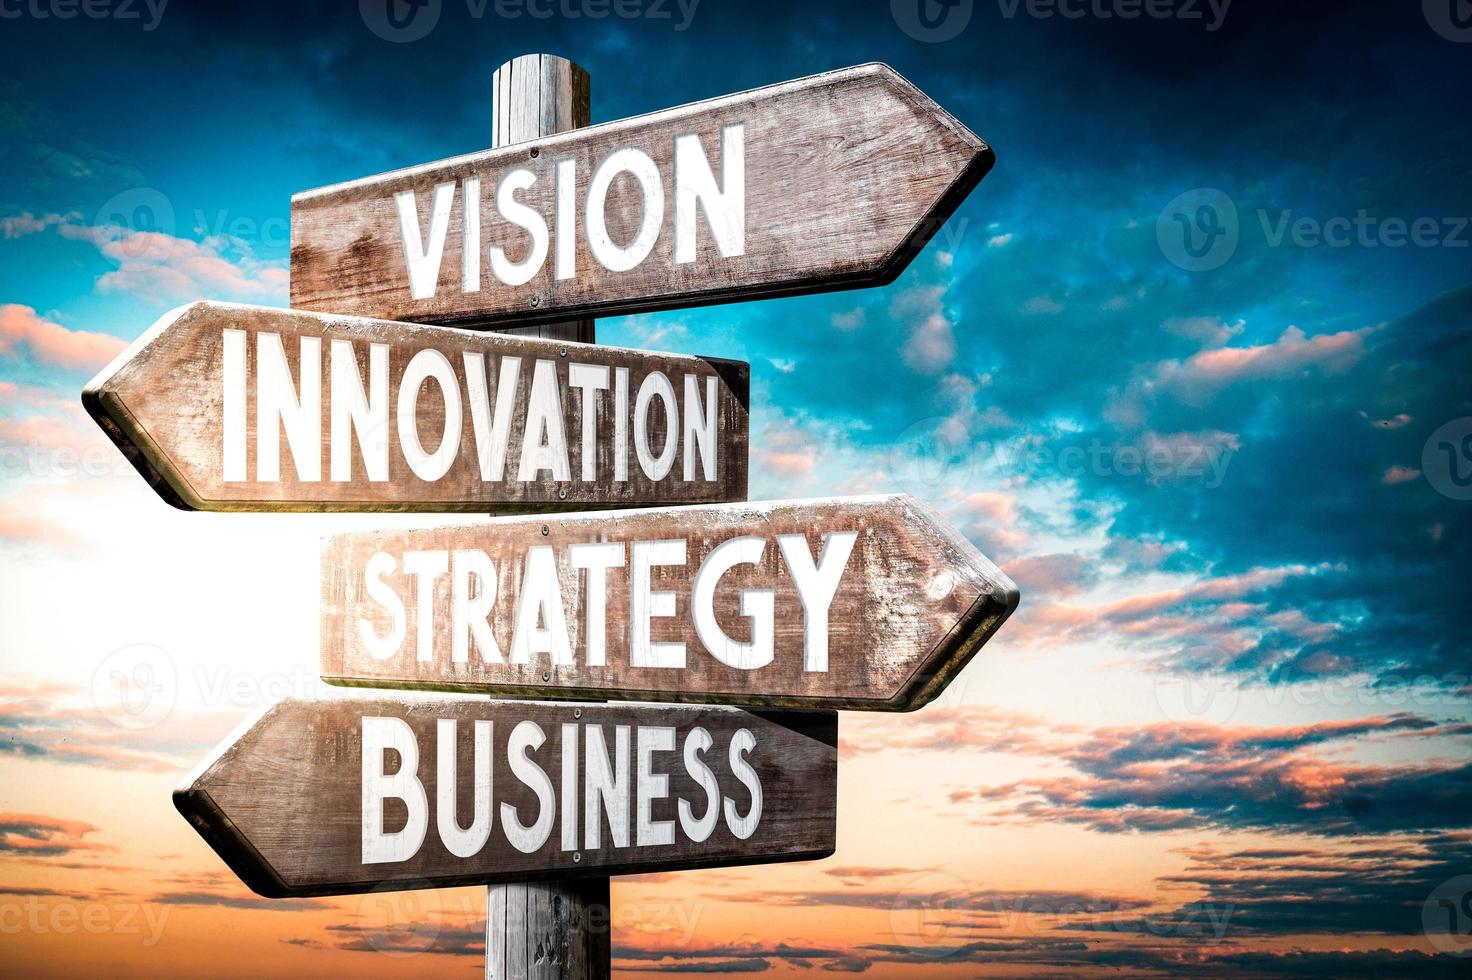 Vision, Innovation, Strategy, Business - Wooden Signpost with Four Arrows, Sunset Sky in Background photo